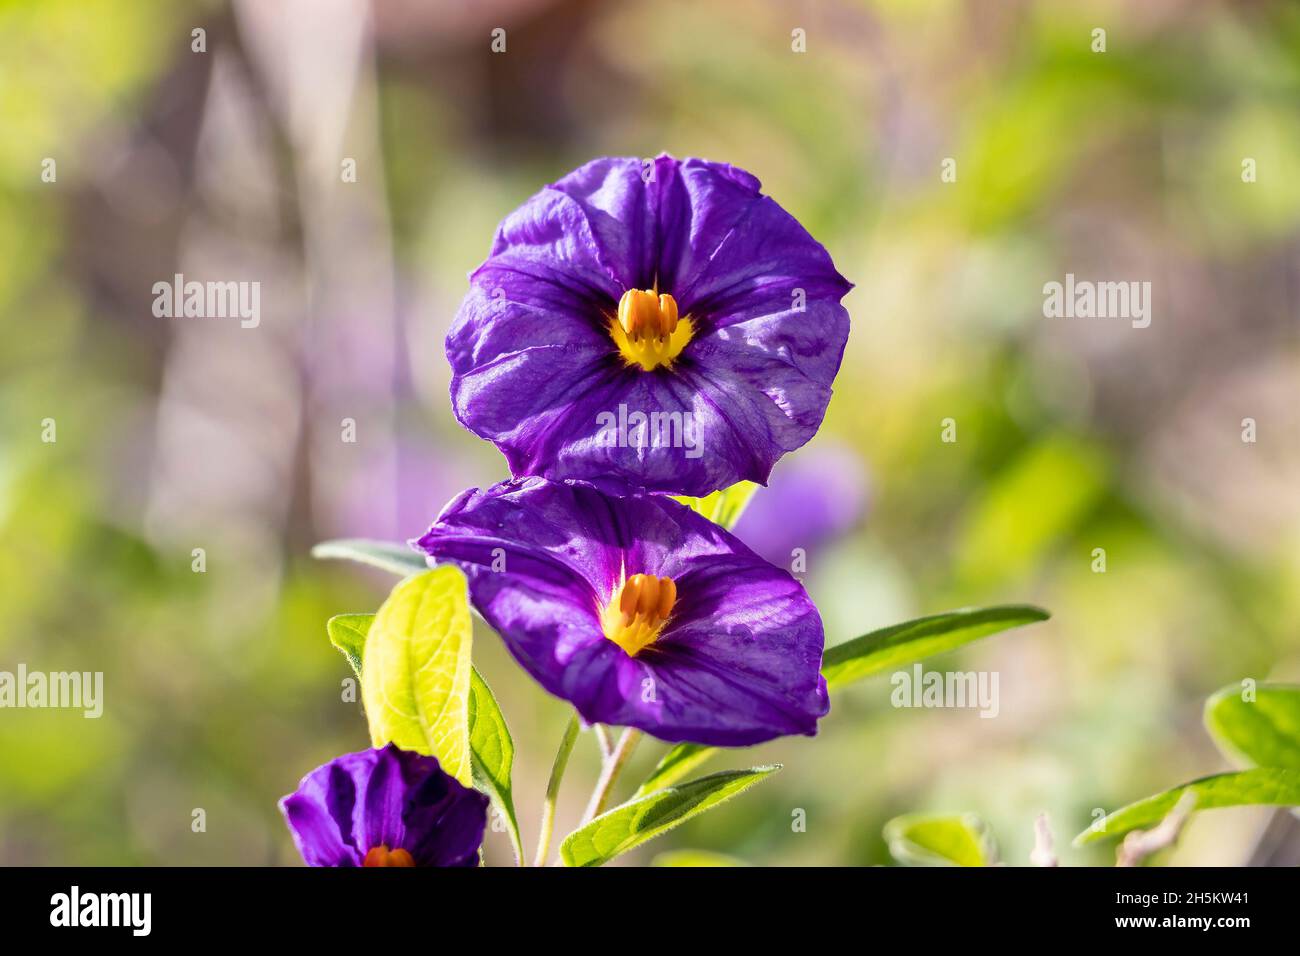 Lycianthes rantonnetii, the blue potato bush or Paraguay nightshade, is a species of flowering plant in the nightshade family Solanaceae, native to So Stock Photo